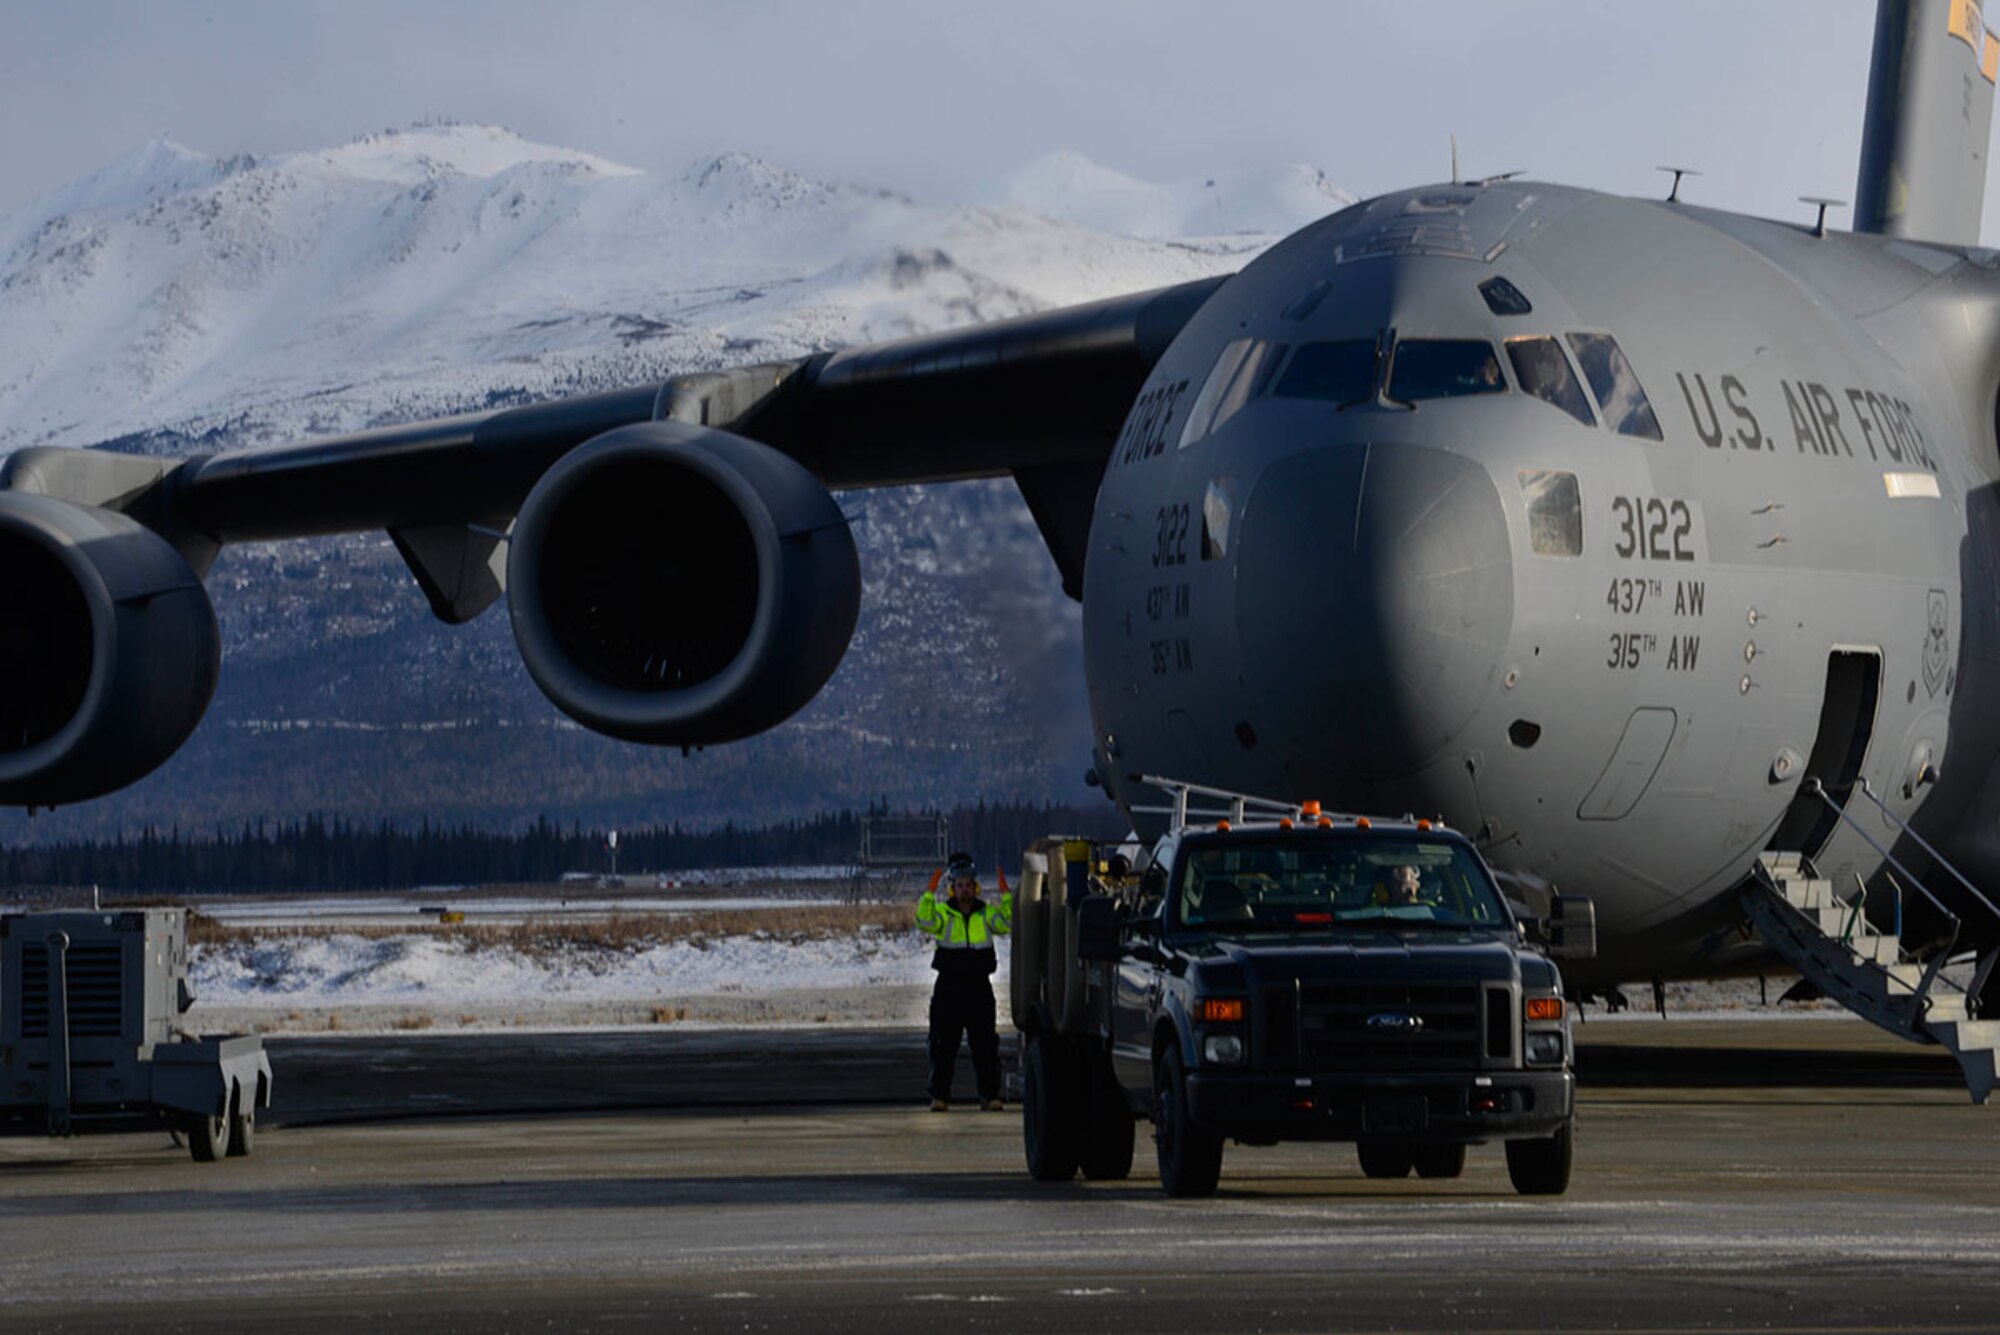 Jeffrey Zook, 732nd Air Mobility Squadron fleet services vehicle operator, guides one of the latrine servicing trucks safely toward a C-17 Globemaster III at Joint Base Elmendorf-Richardson. Fleet services ensures all aircraft, regardless of origin, are clean and serviceable for aircrews and passengers. (U.S. Air Force photo by Airman Valerie Monroy)